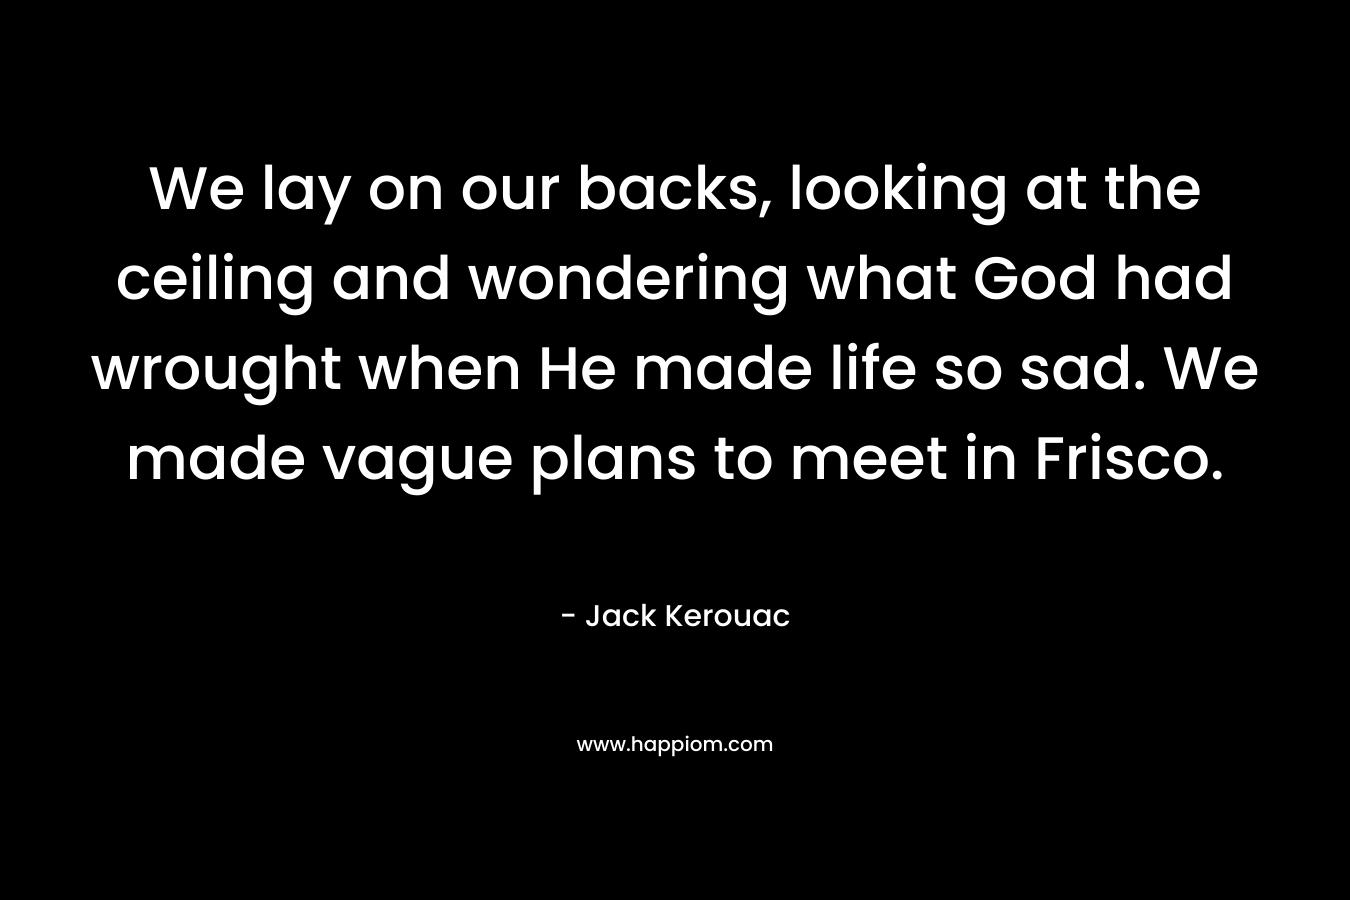 We lay on our backs, looking at the ceiling and wondering what God had wrought when He made life so sad. We made vague plans to meet in Frisco. – Jack Kerouac